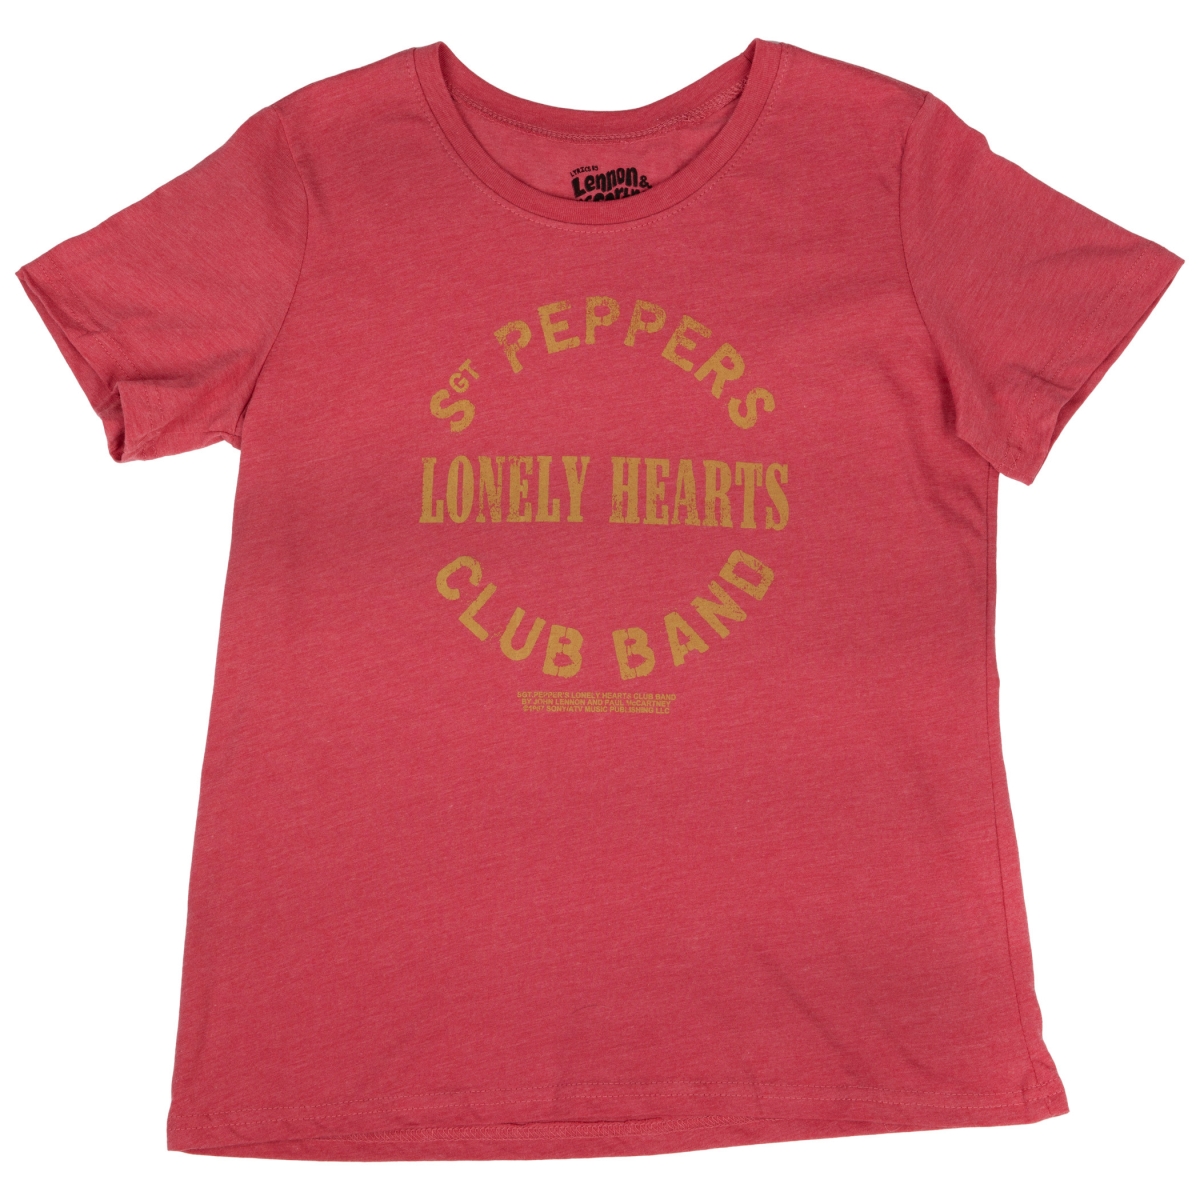 845641-large The  SGT Peppers Lonely Hearts Club Band Juniors T-Shirt - Large -  Beatles